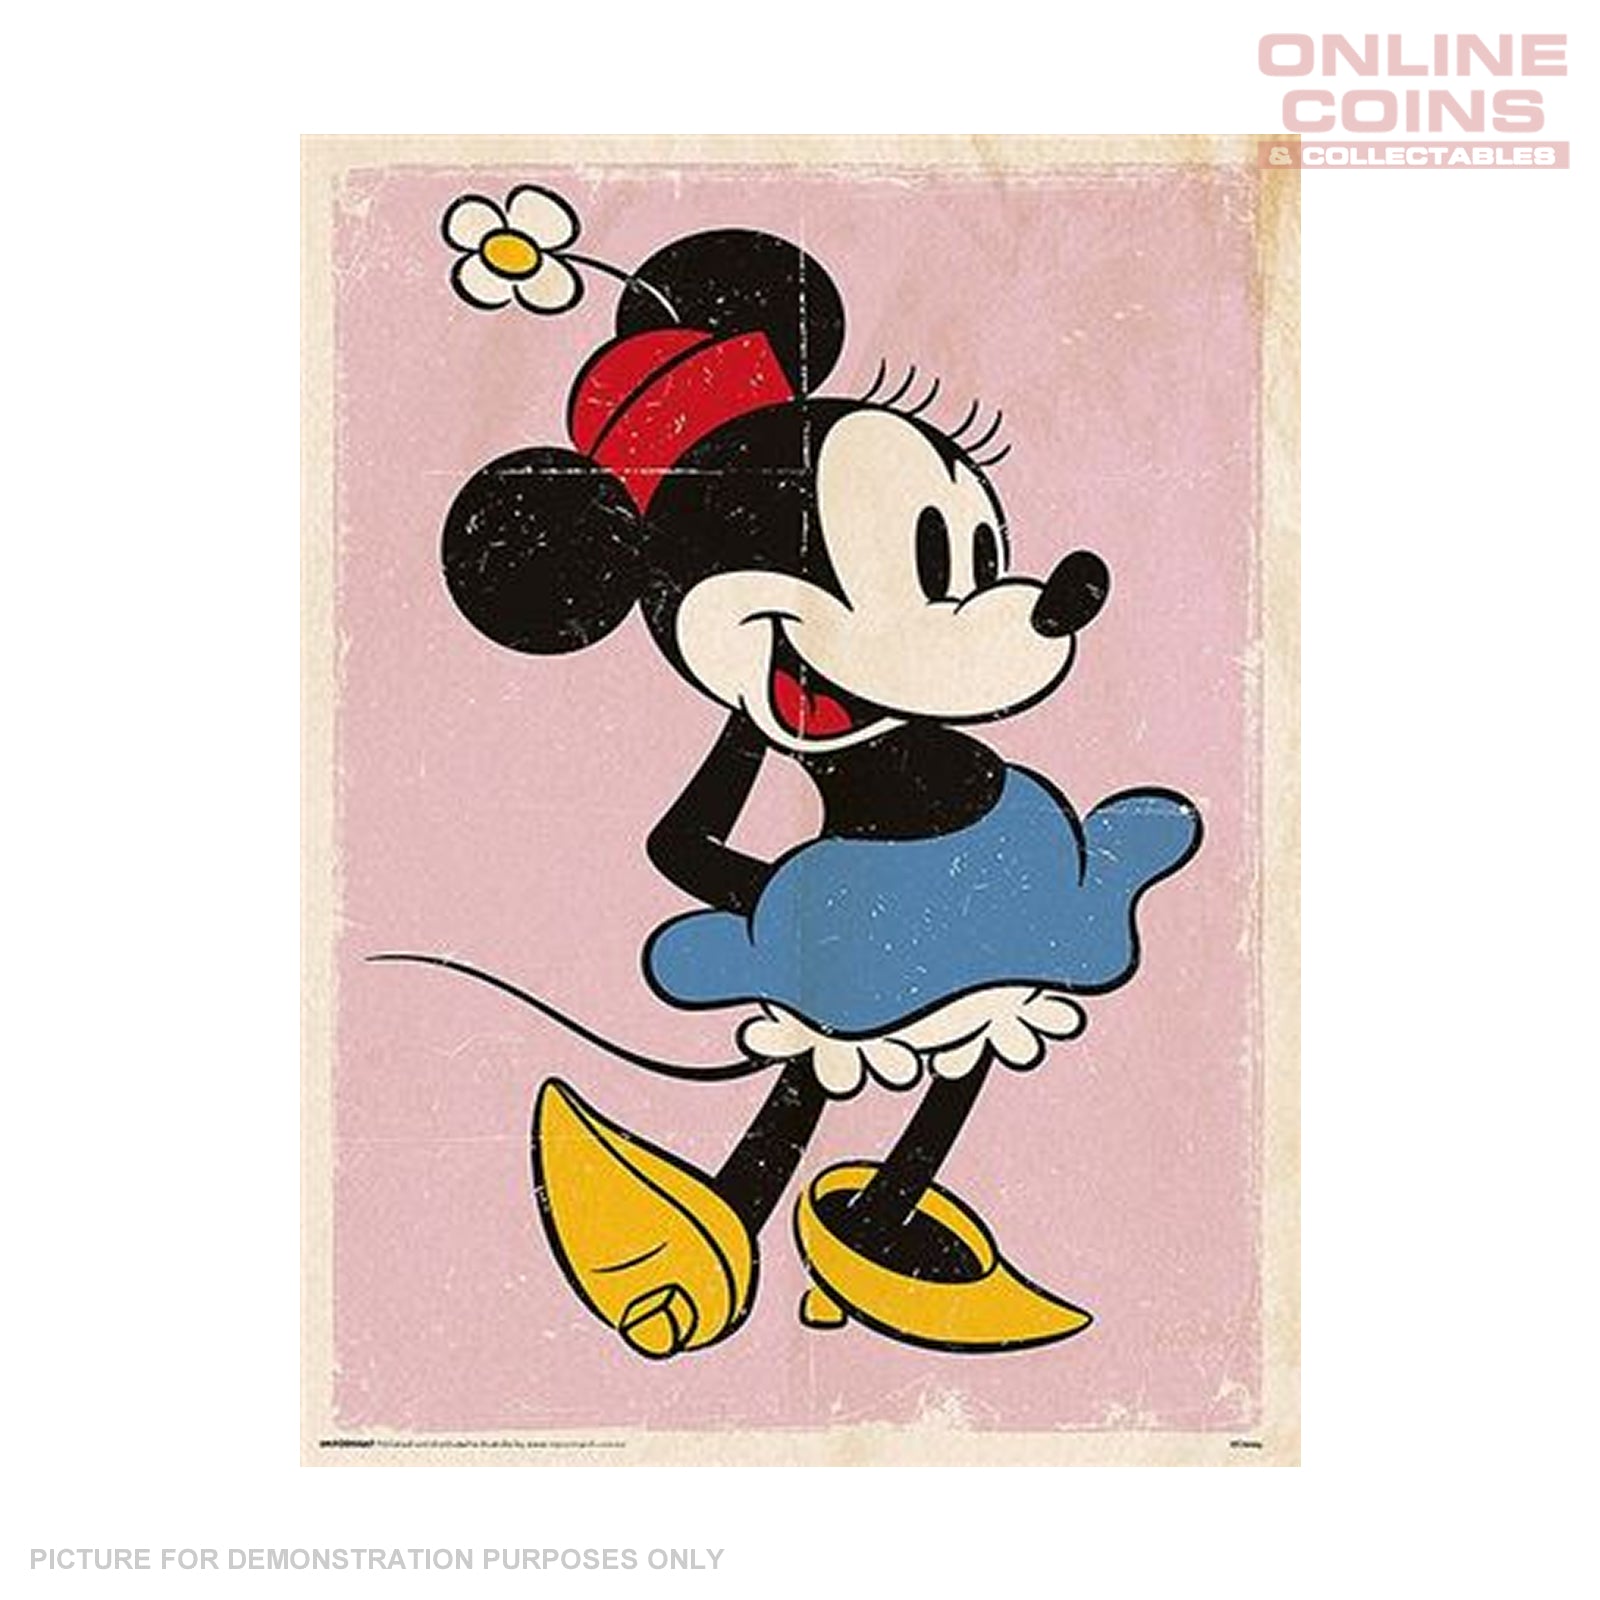 Disney Officially Licensed Art Print - Minnie Mouse Retro A3 Print